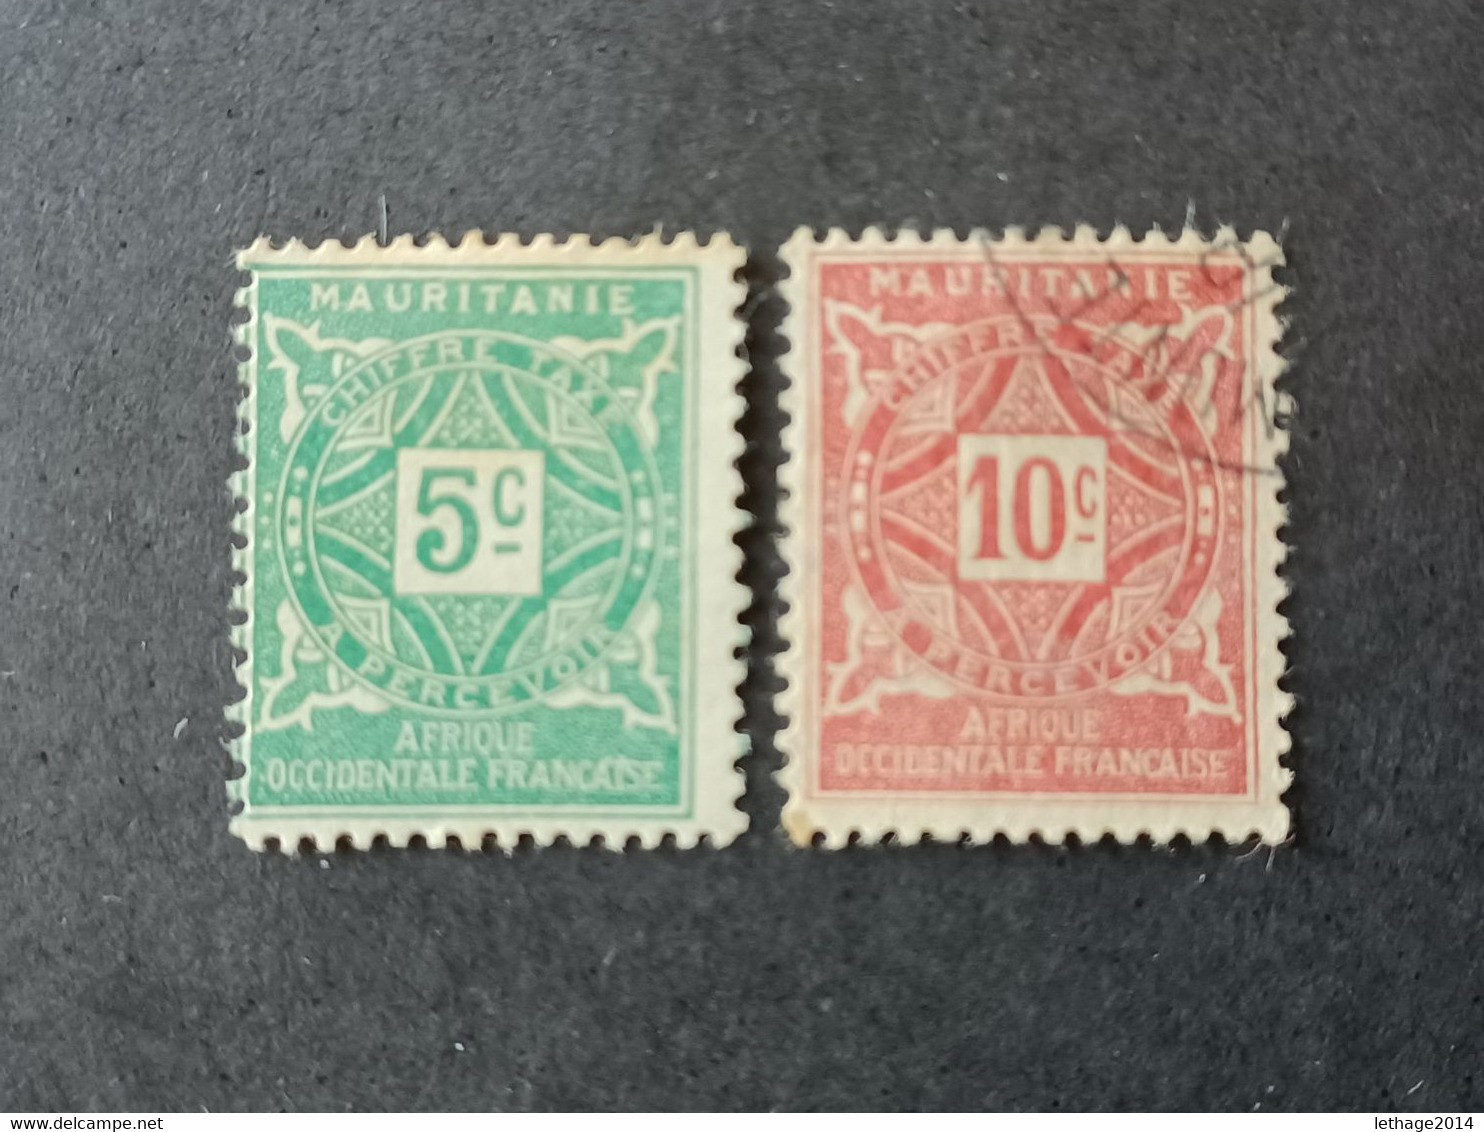 STAMPS MAURITANIE AFREQUE OCCIDENTALE FRANCAISE 1914 TAXE - Used Stamps